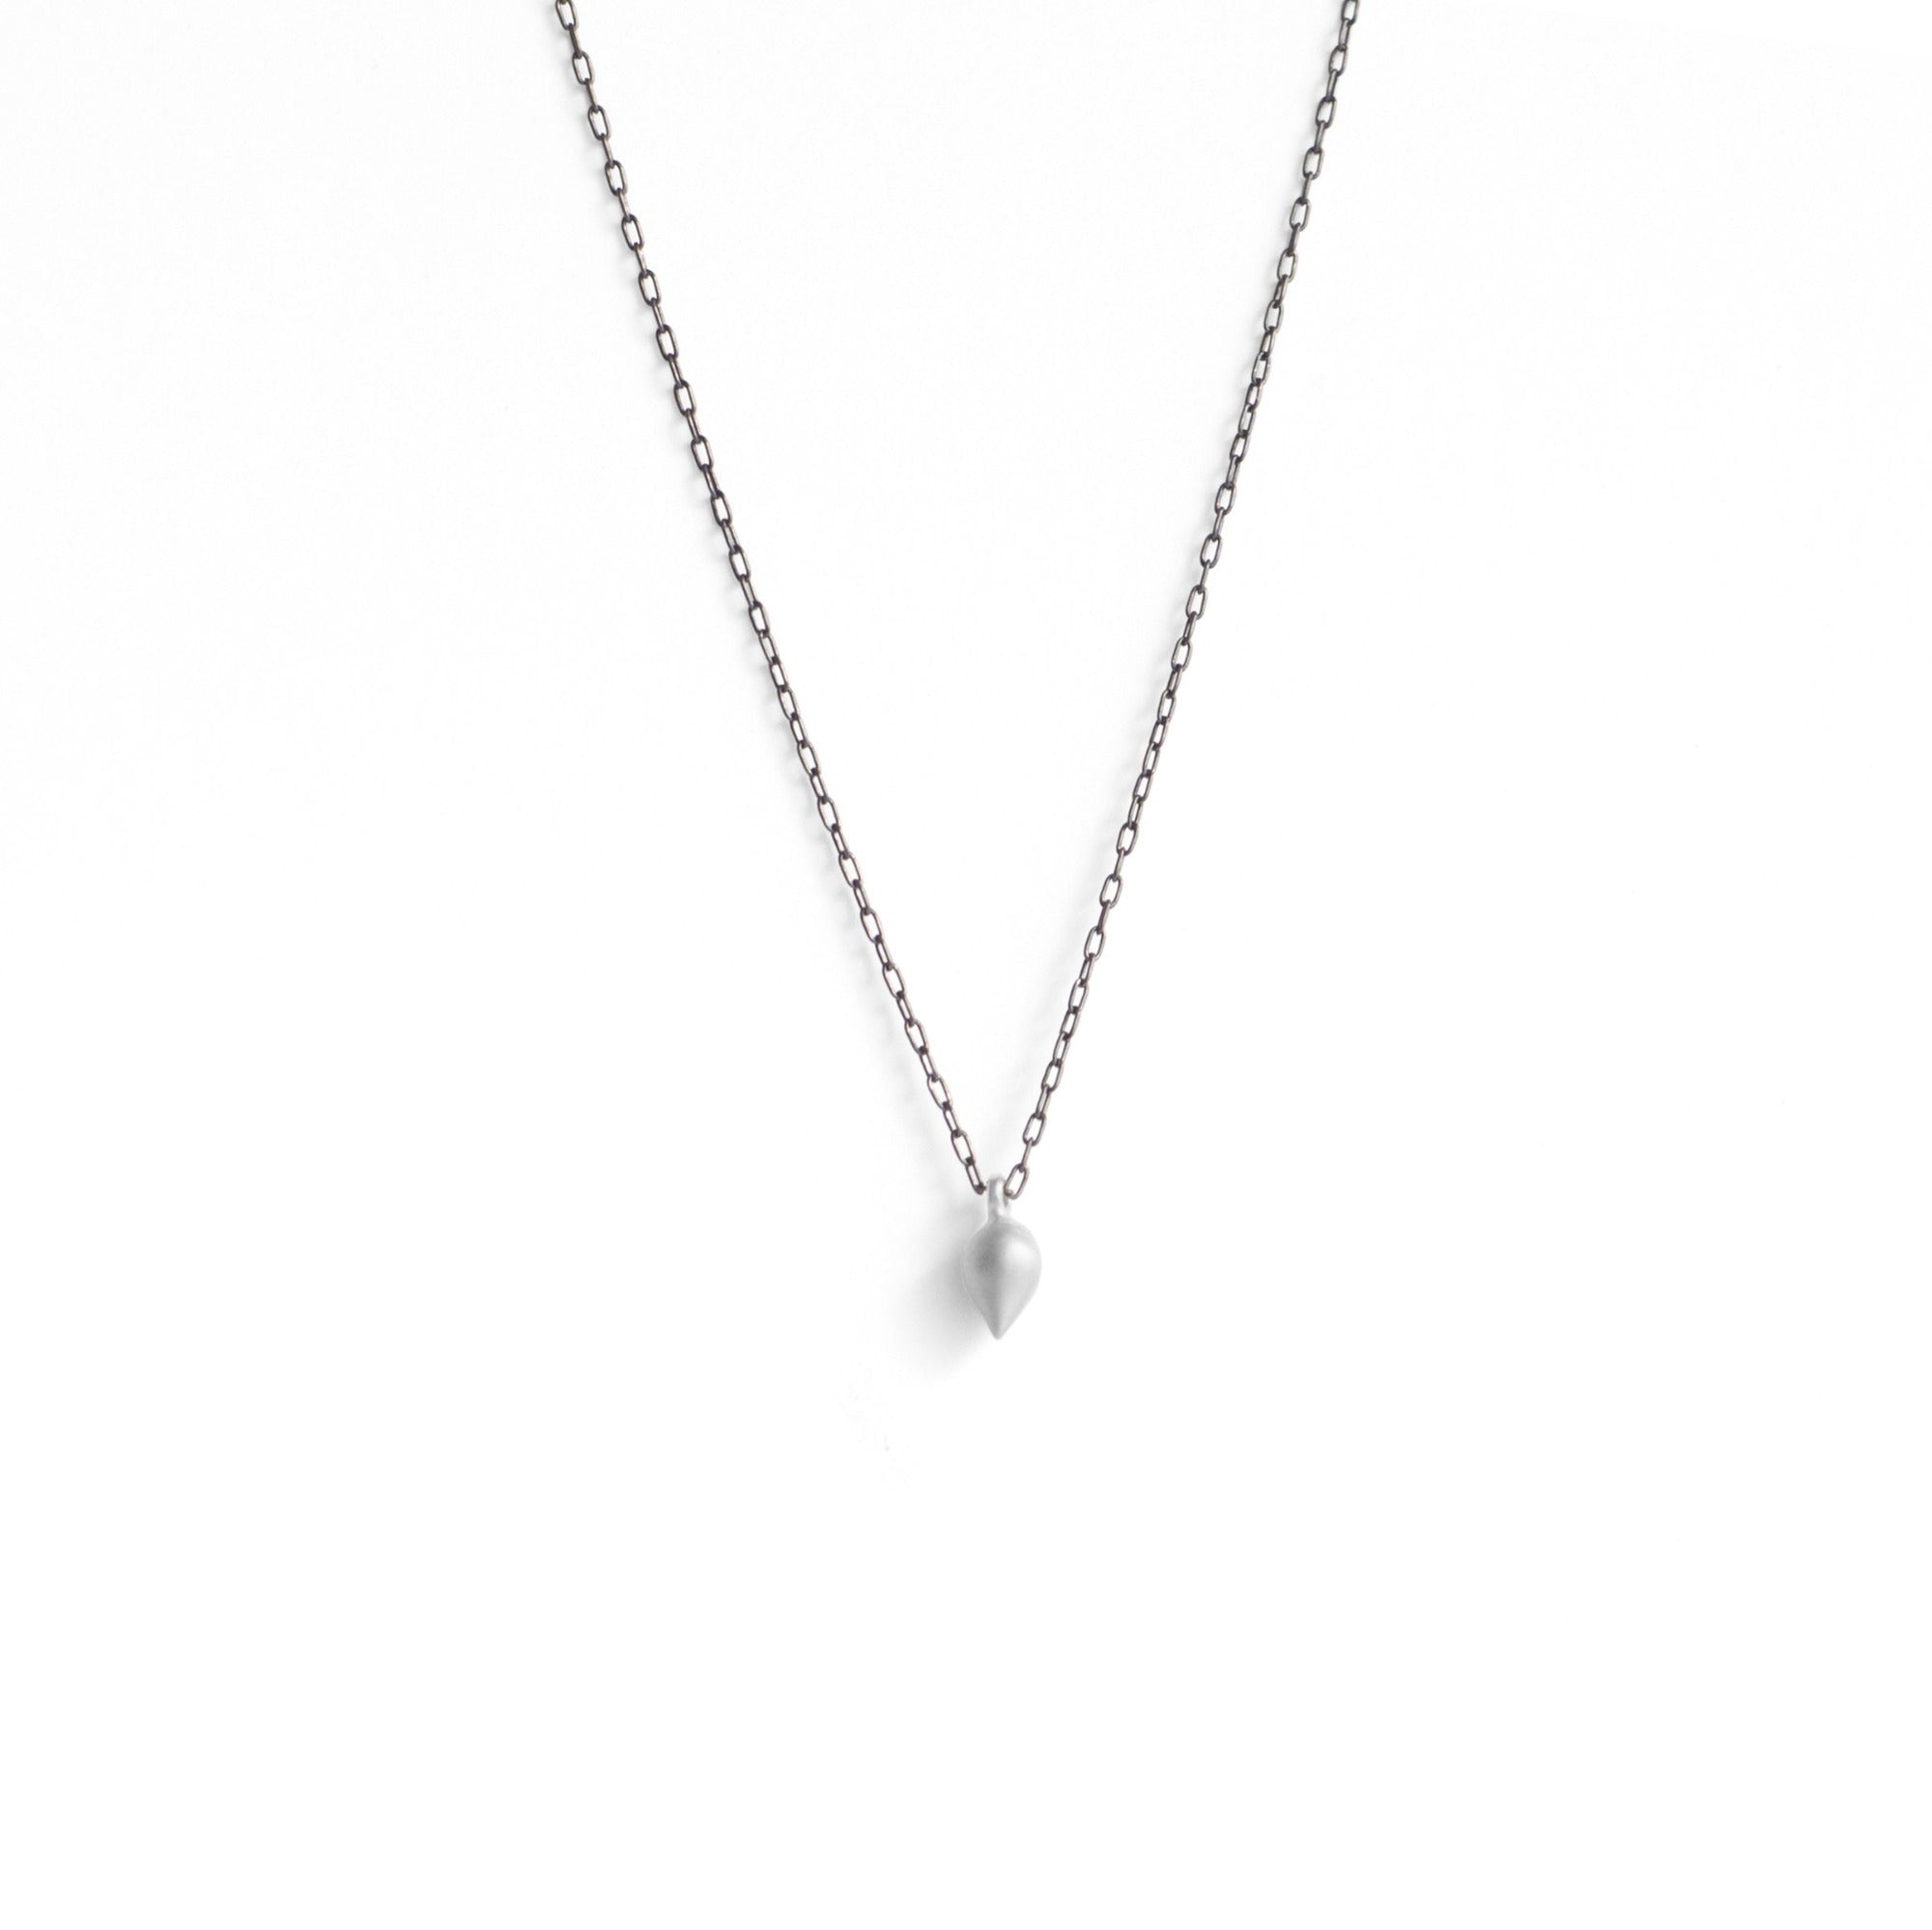 sterling silver/oxidized sterling silver chain tiny pod necklace